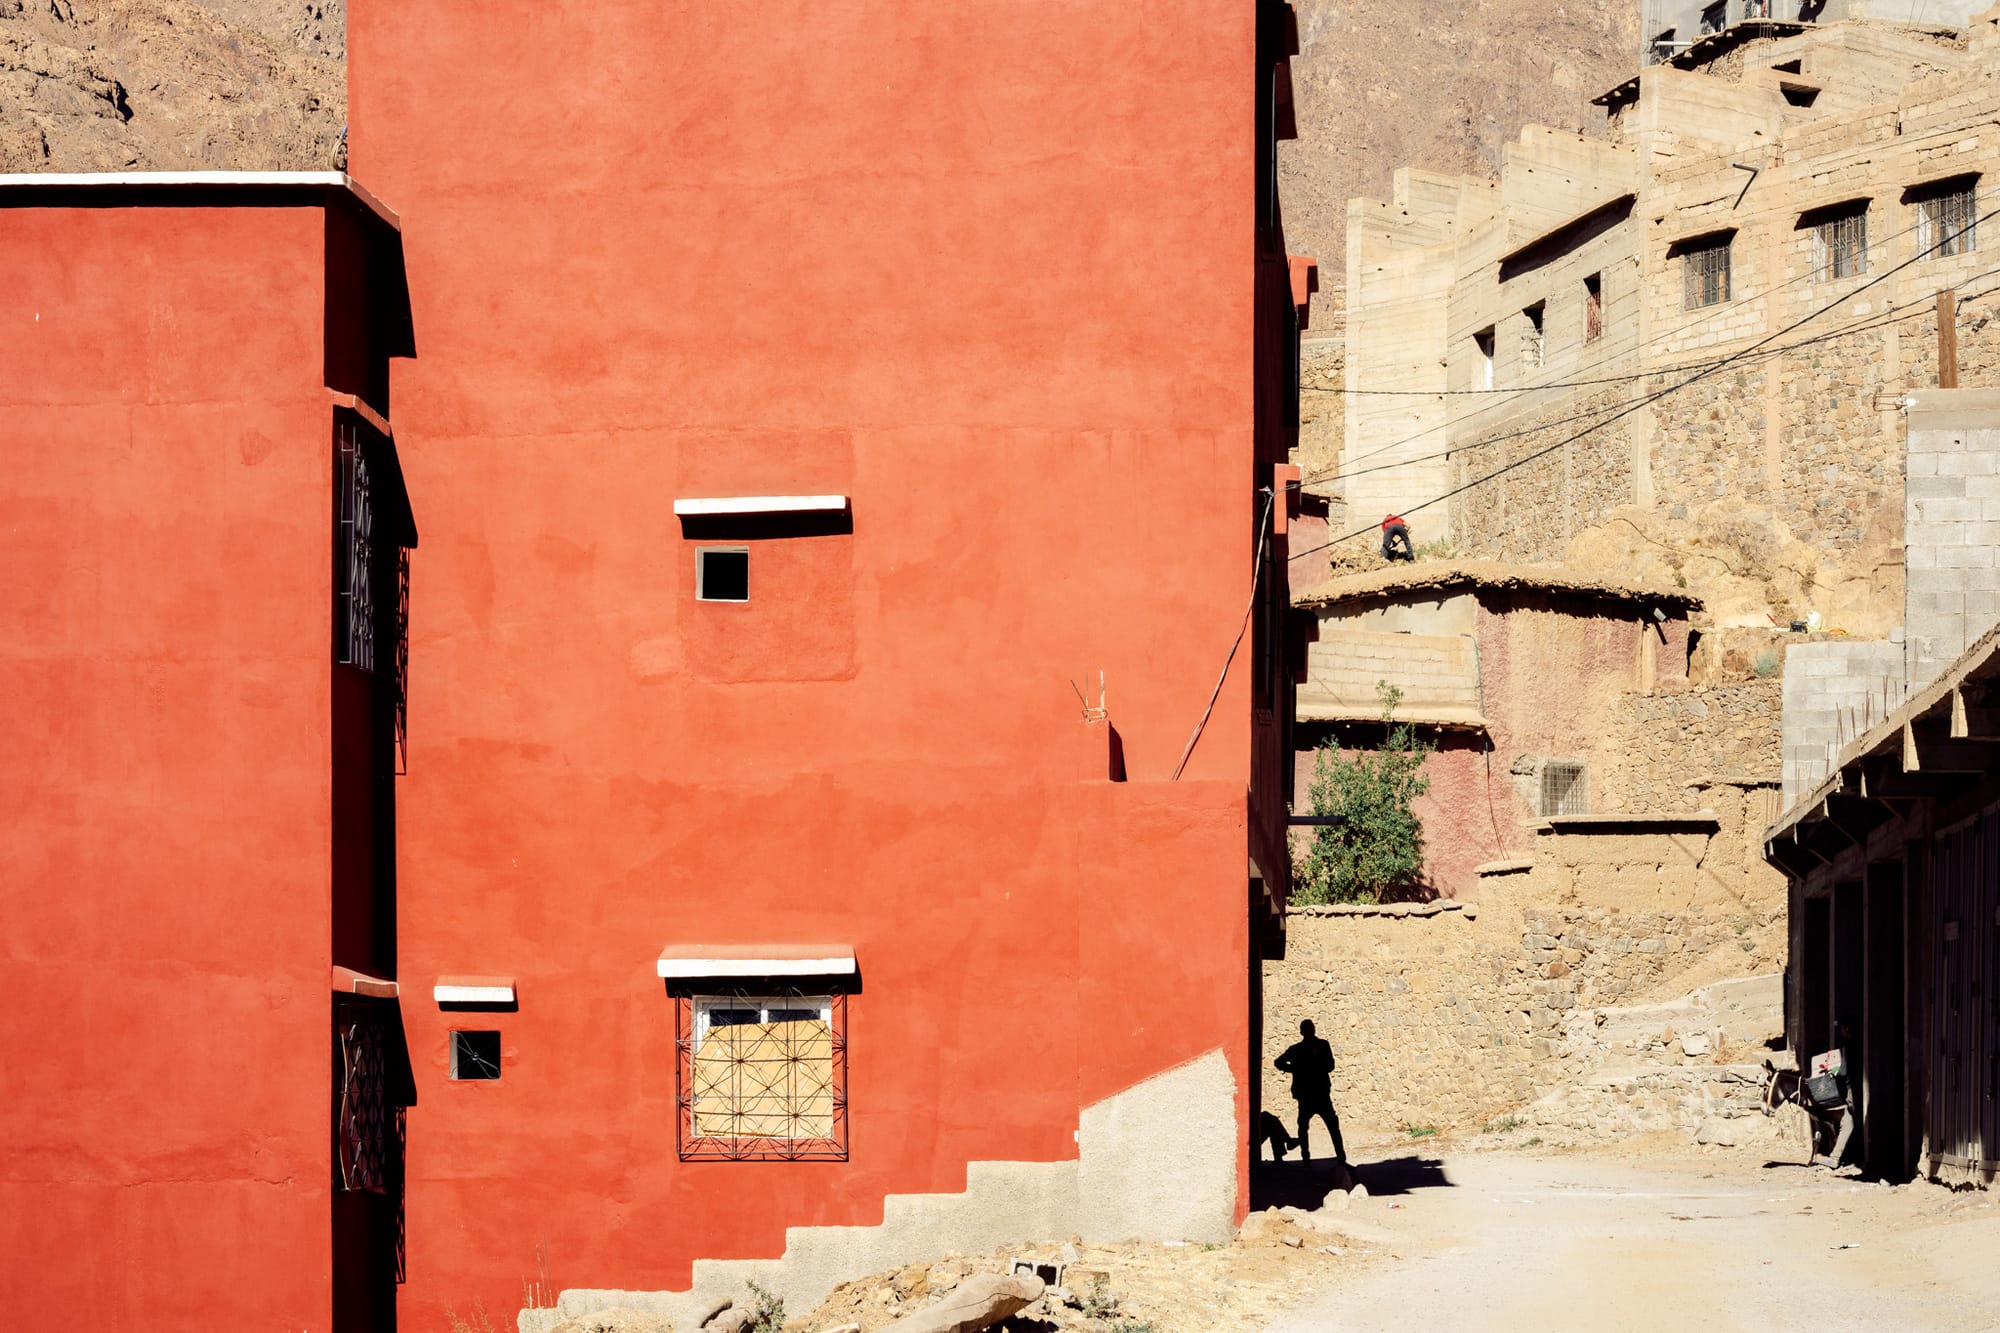 Postcards from Morocco